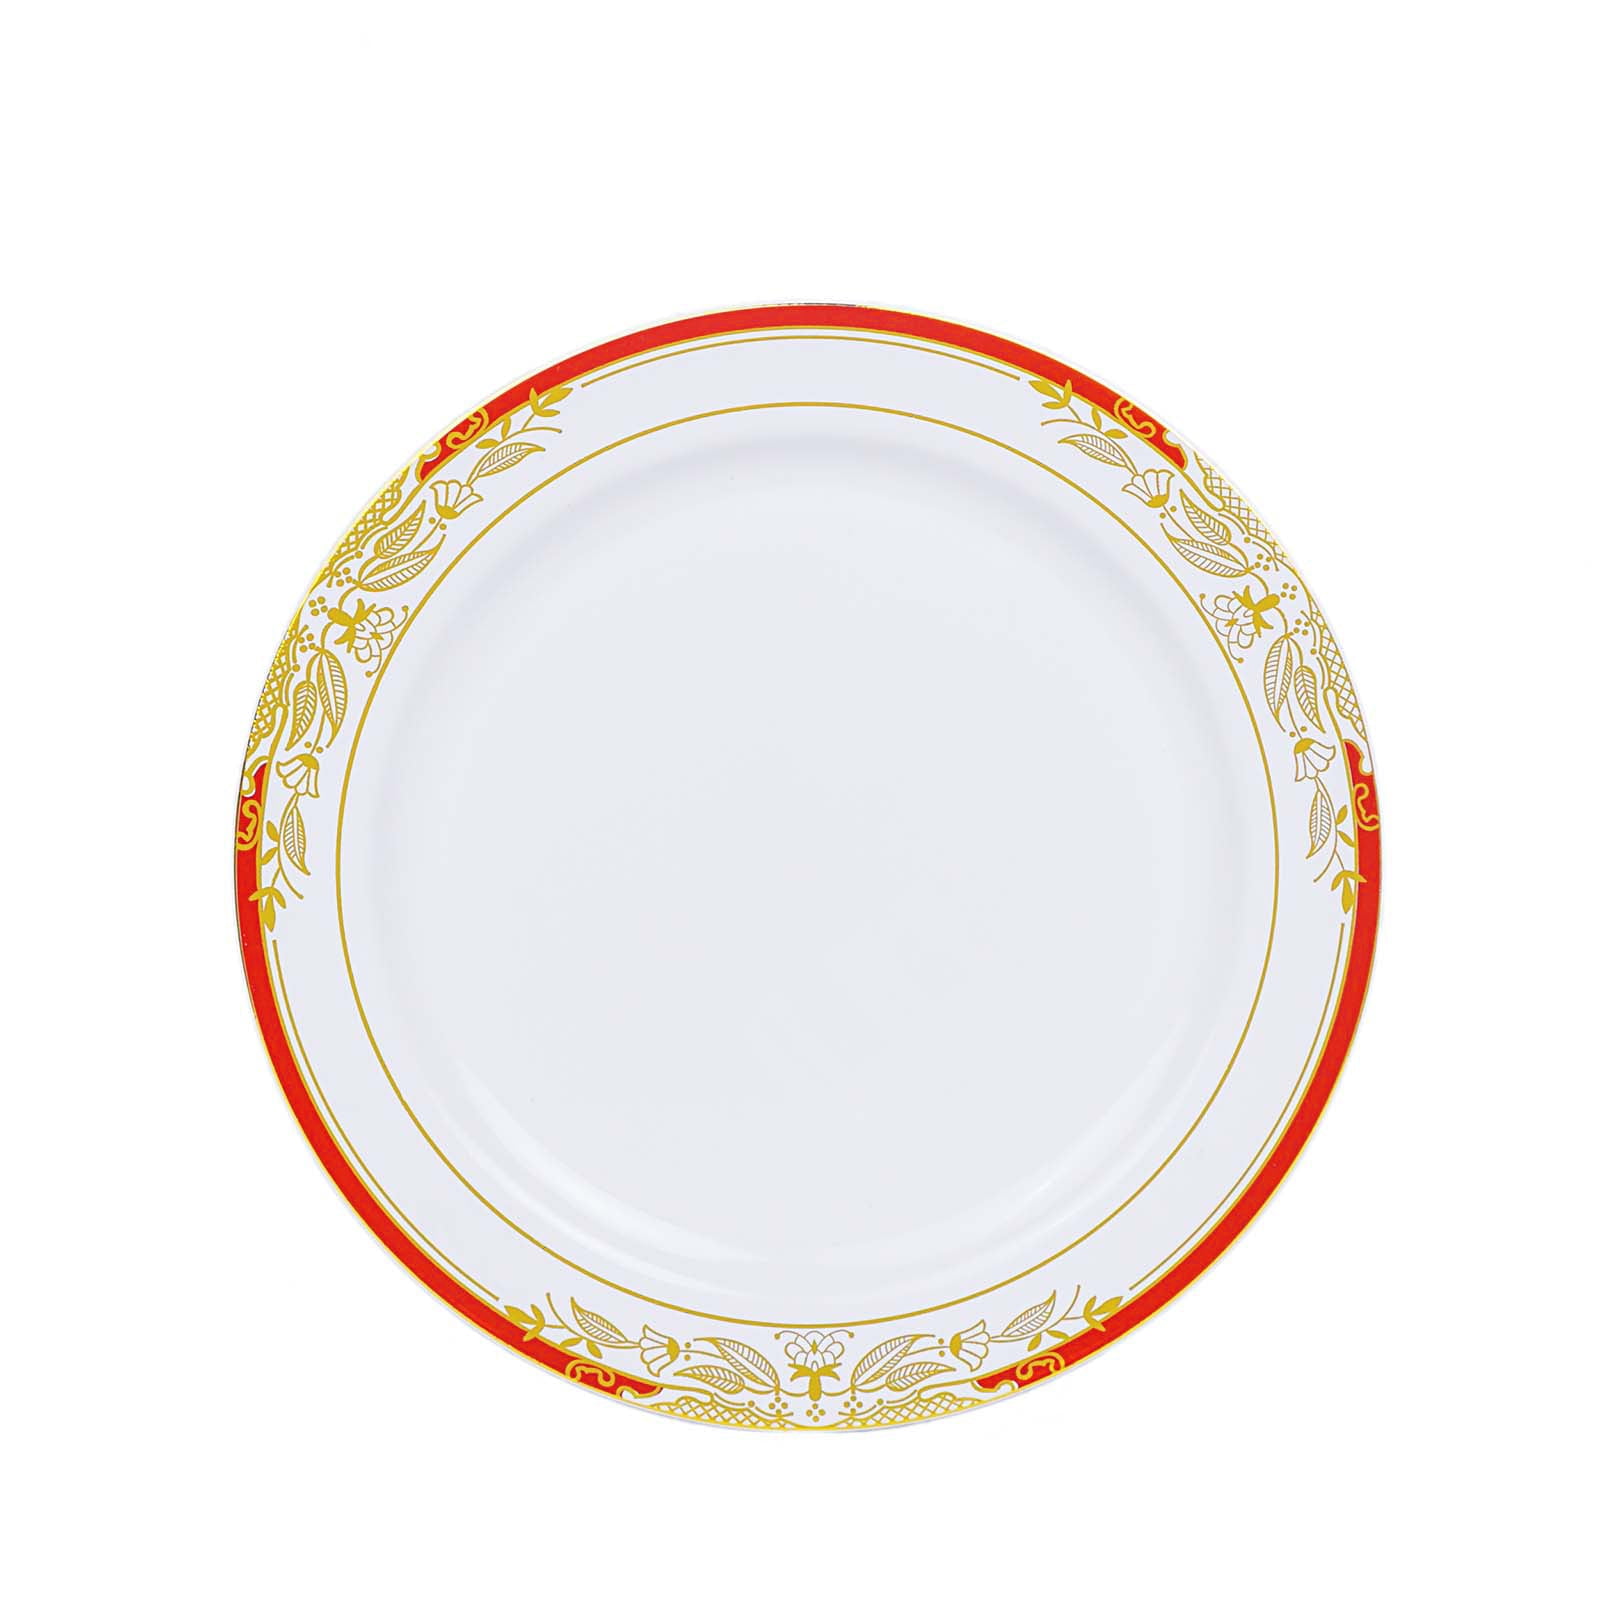 Efavormart 10 Pack | 8 inch Clear / Gold Wavy Rim Square Hard Plastic Dinner Plates, Disposable Party Plates, Infant Girl's